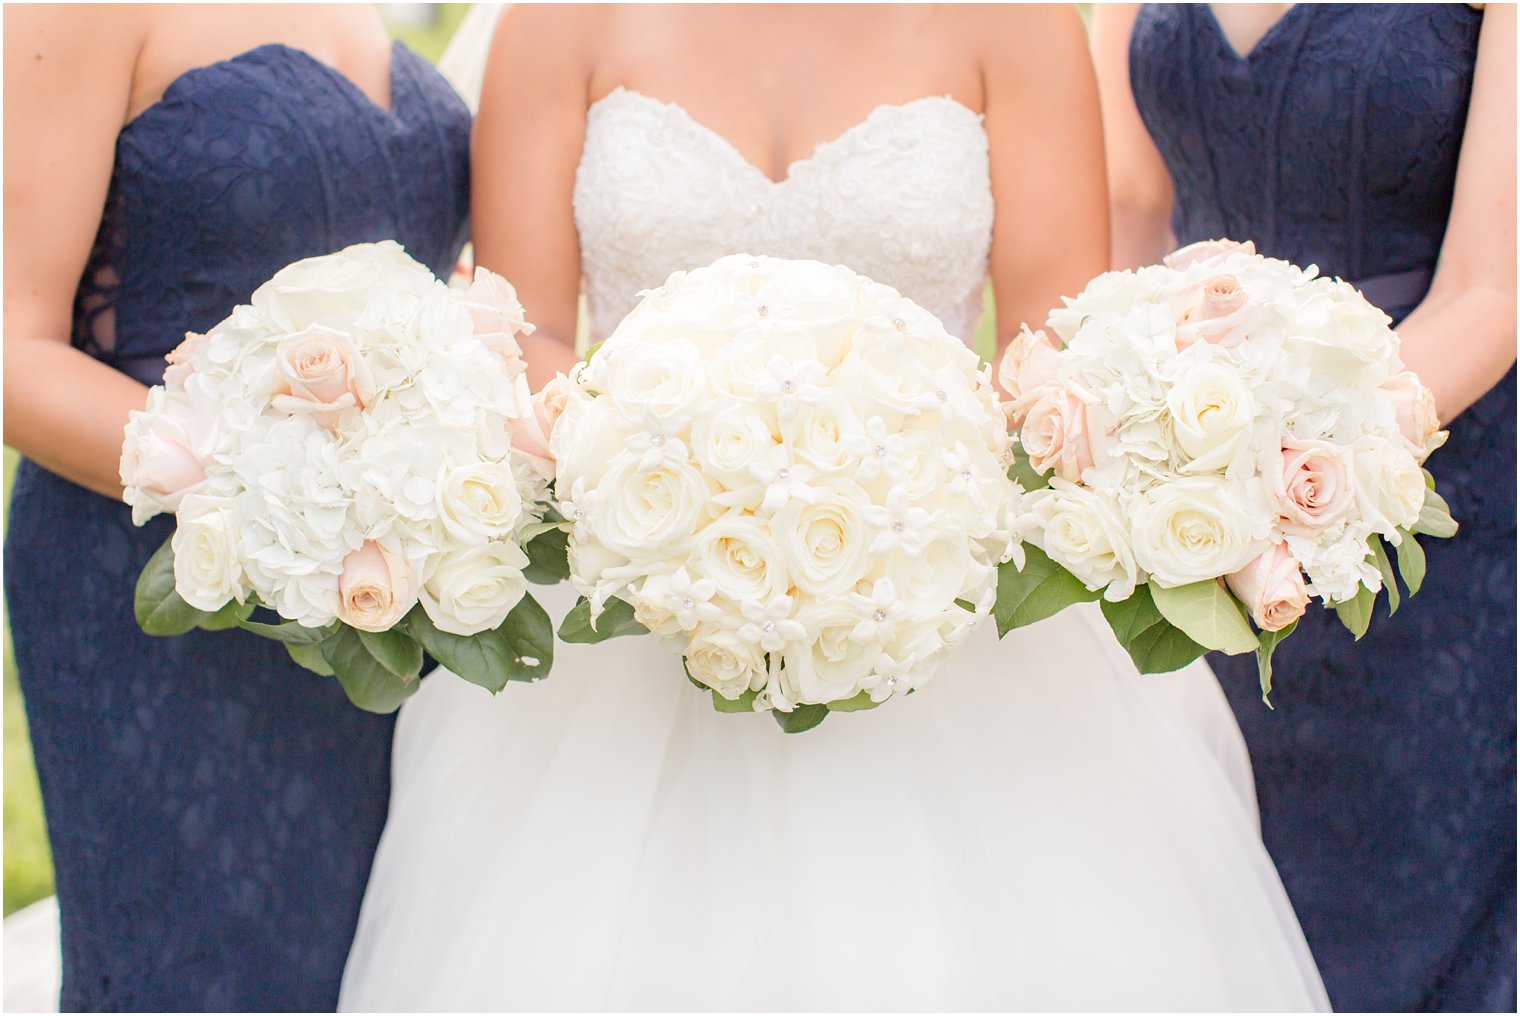 Bouquets in white and blush